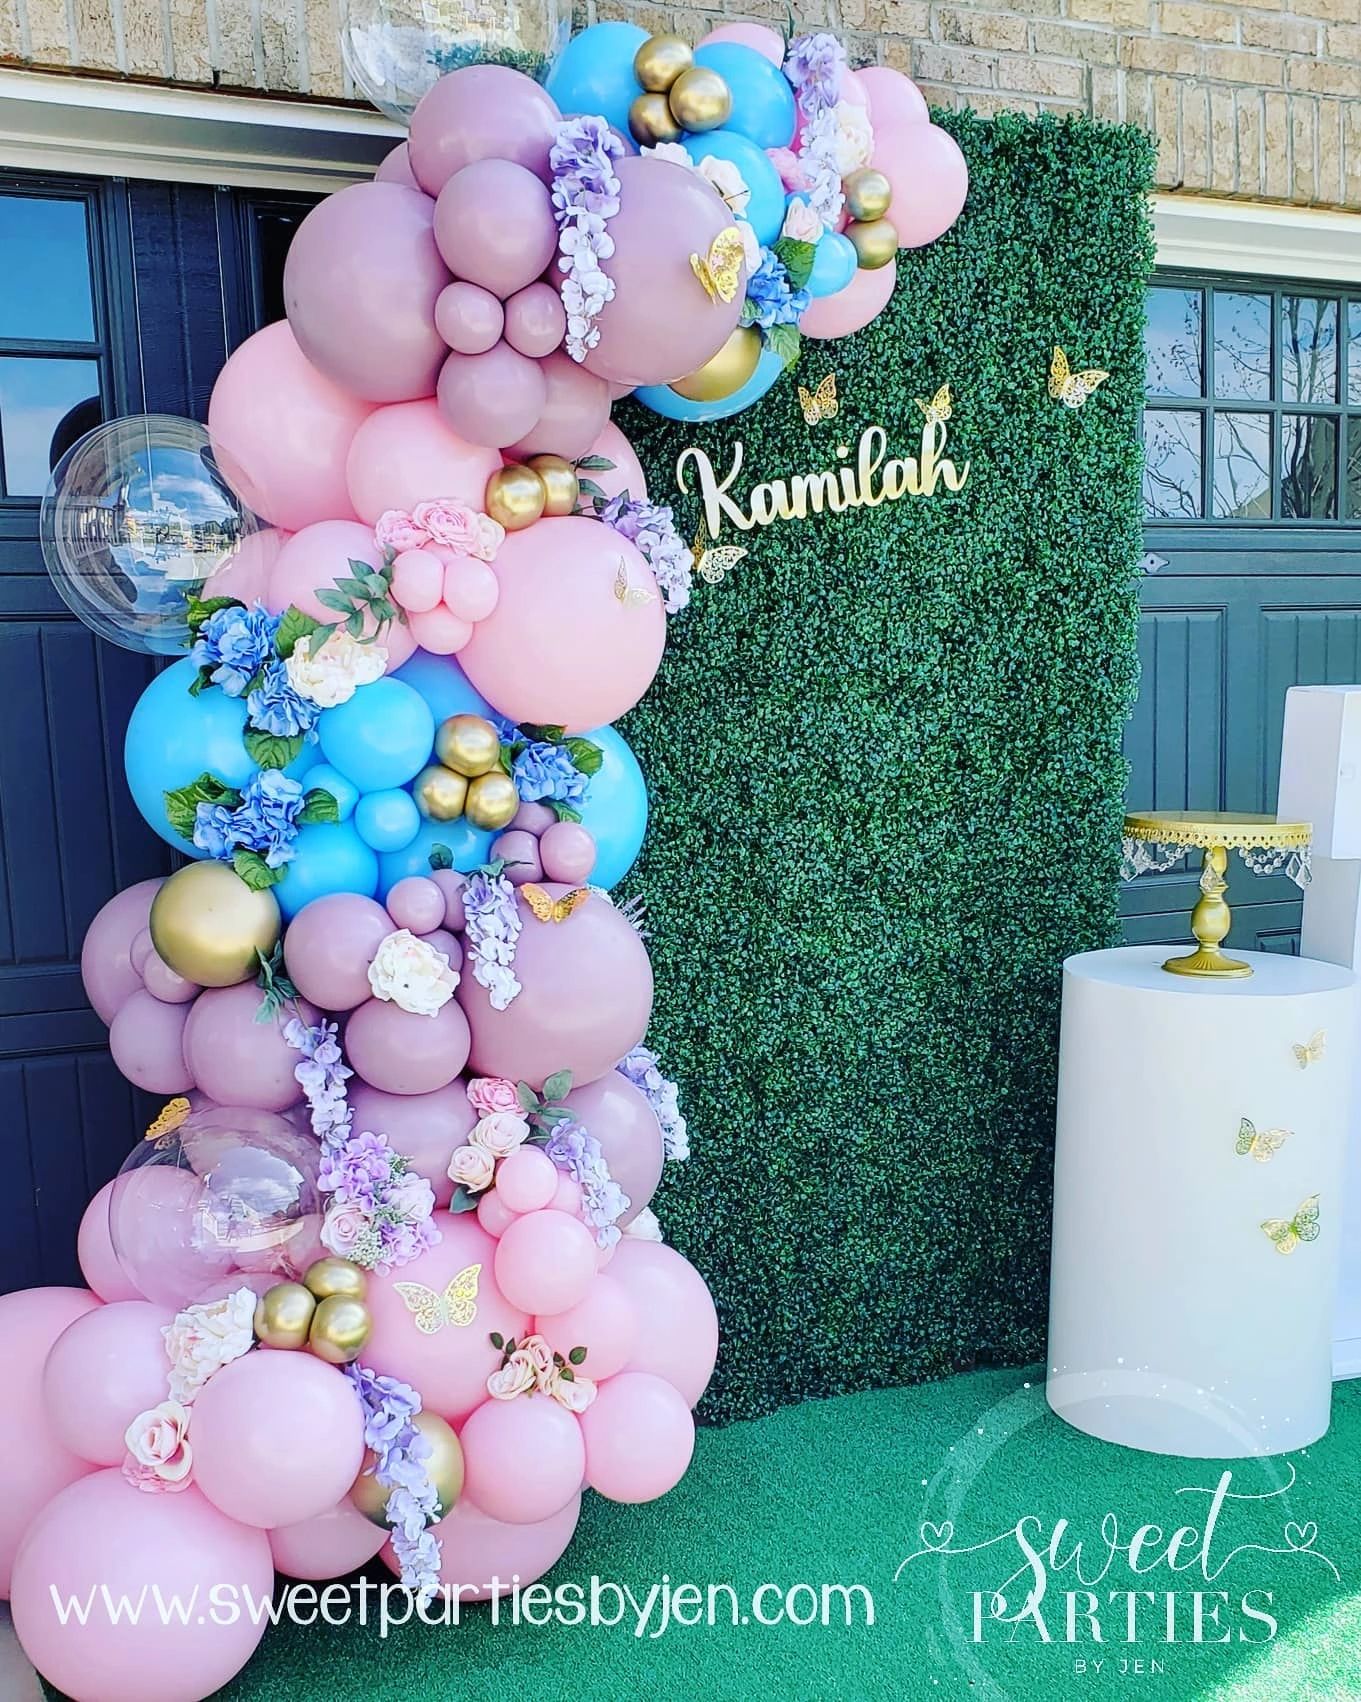 Backdrop and Balloons - Sweet Parties by Jen